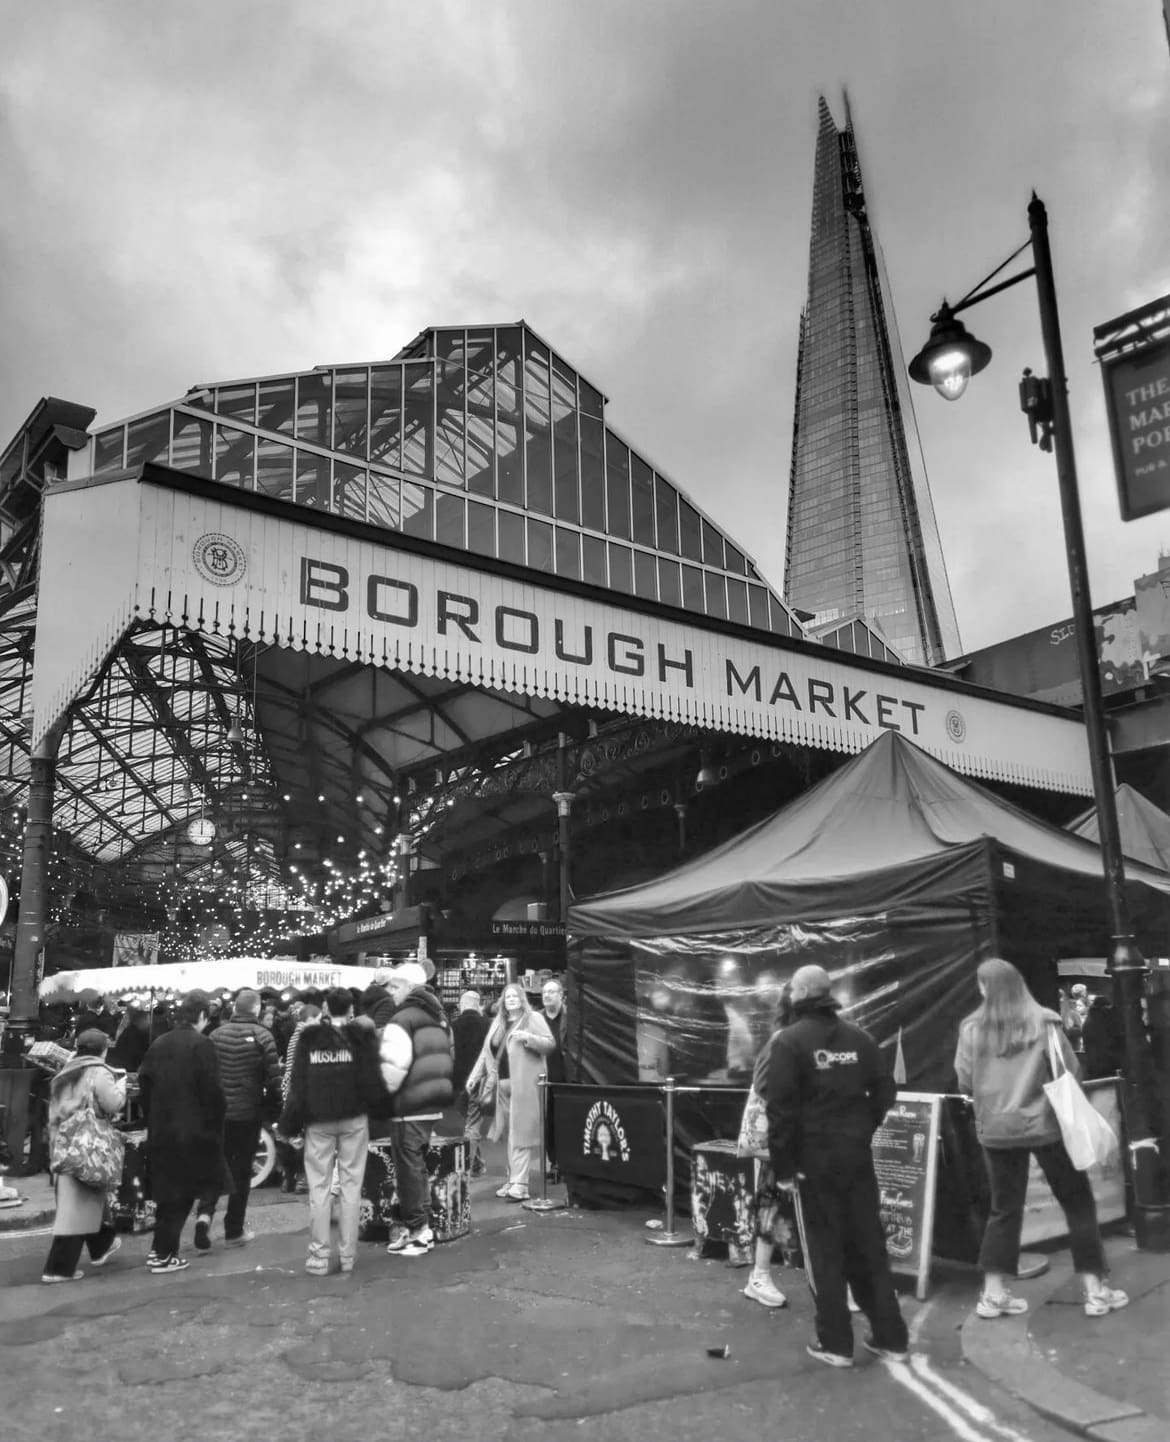 Borough Market, London - the best ways to experience culture in Europe